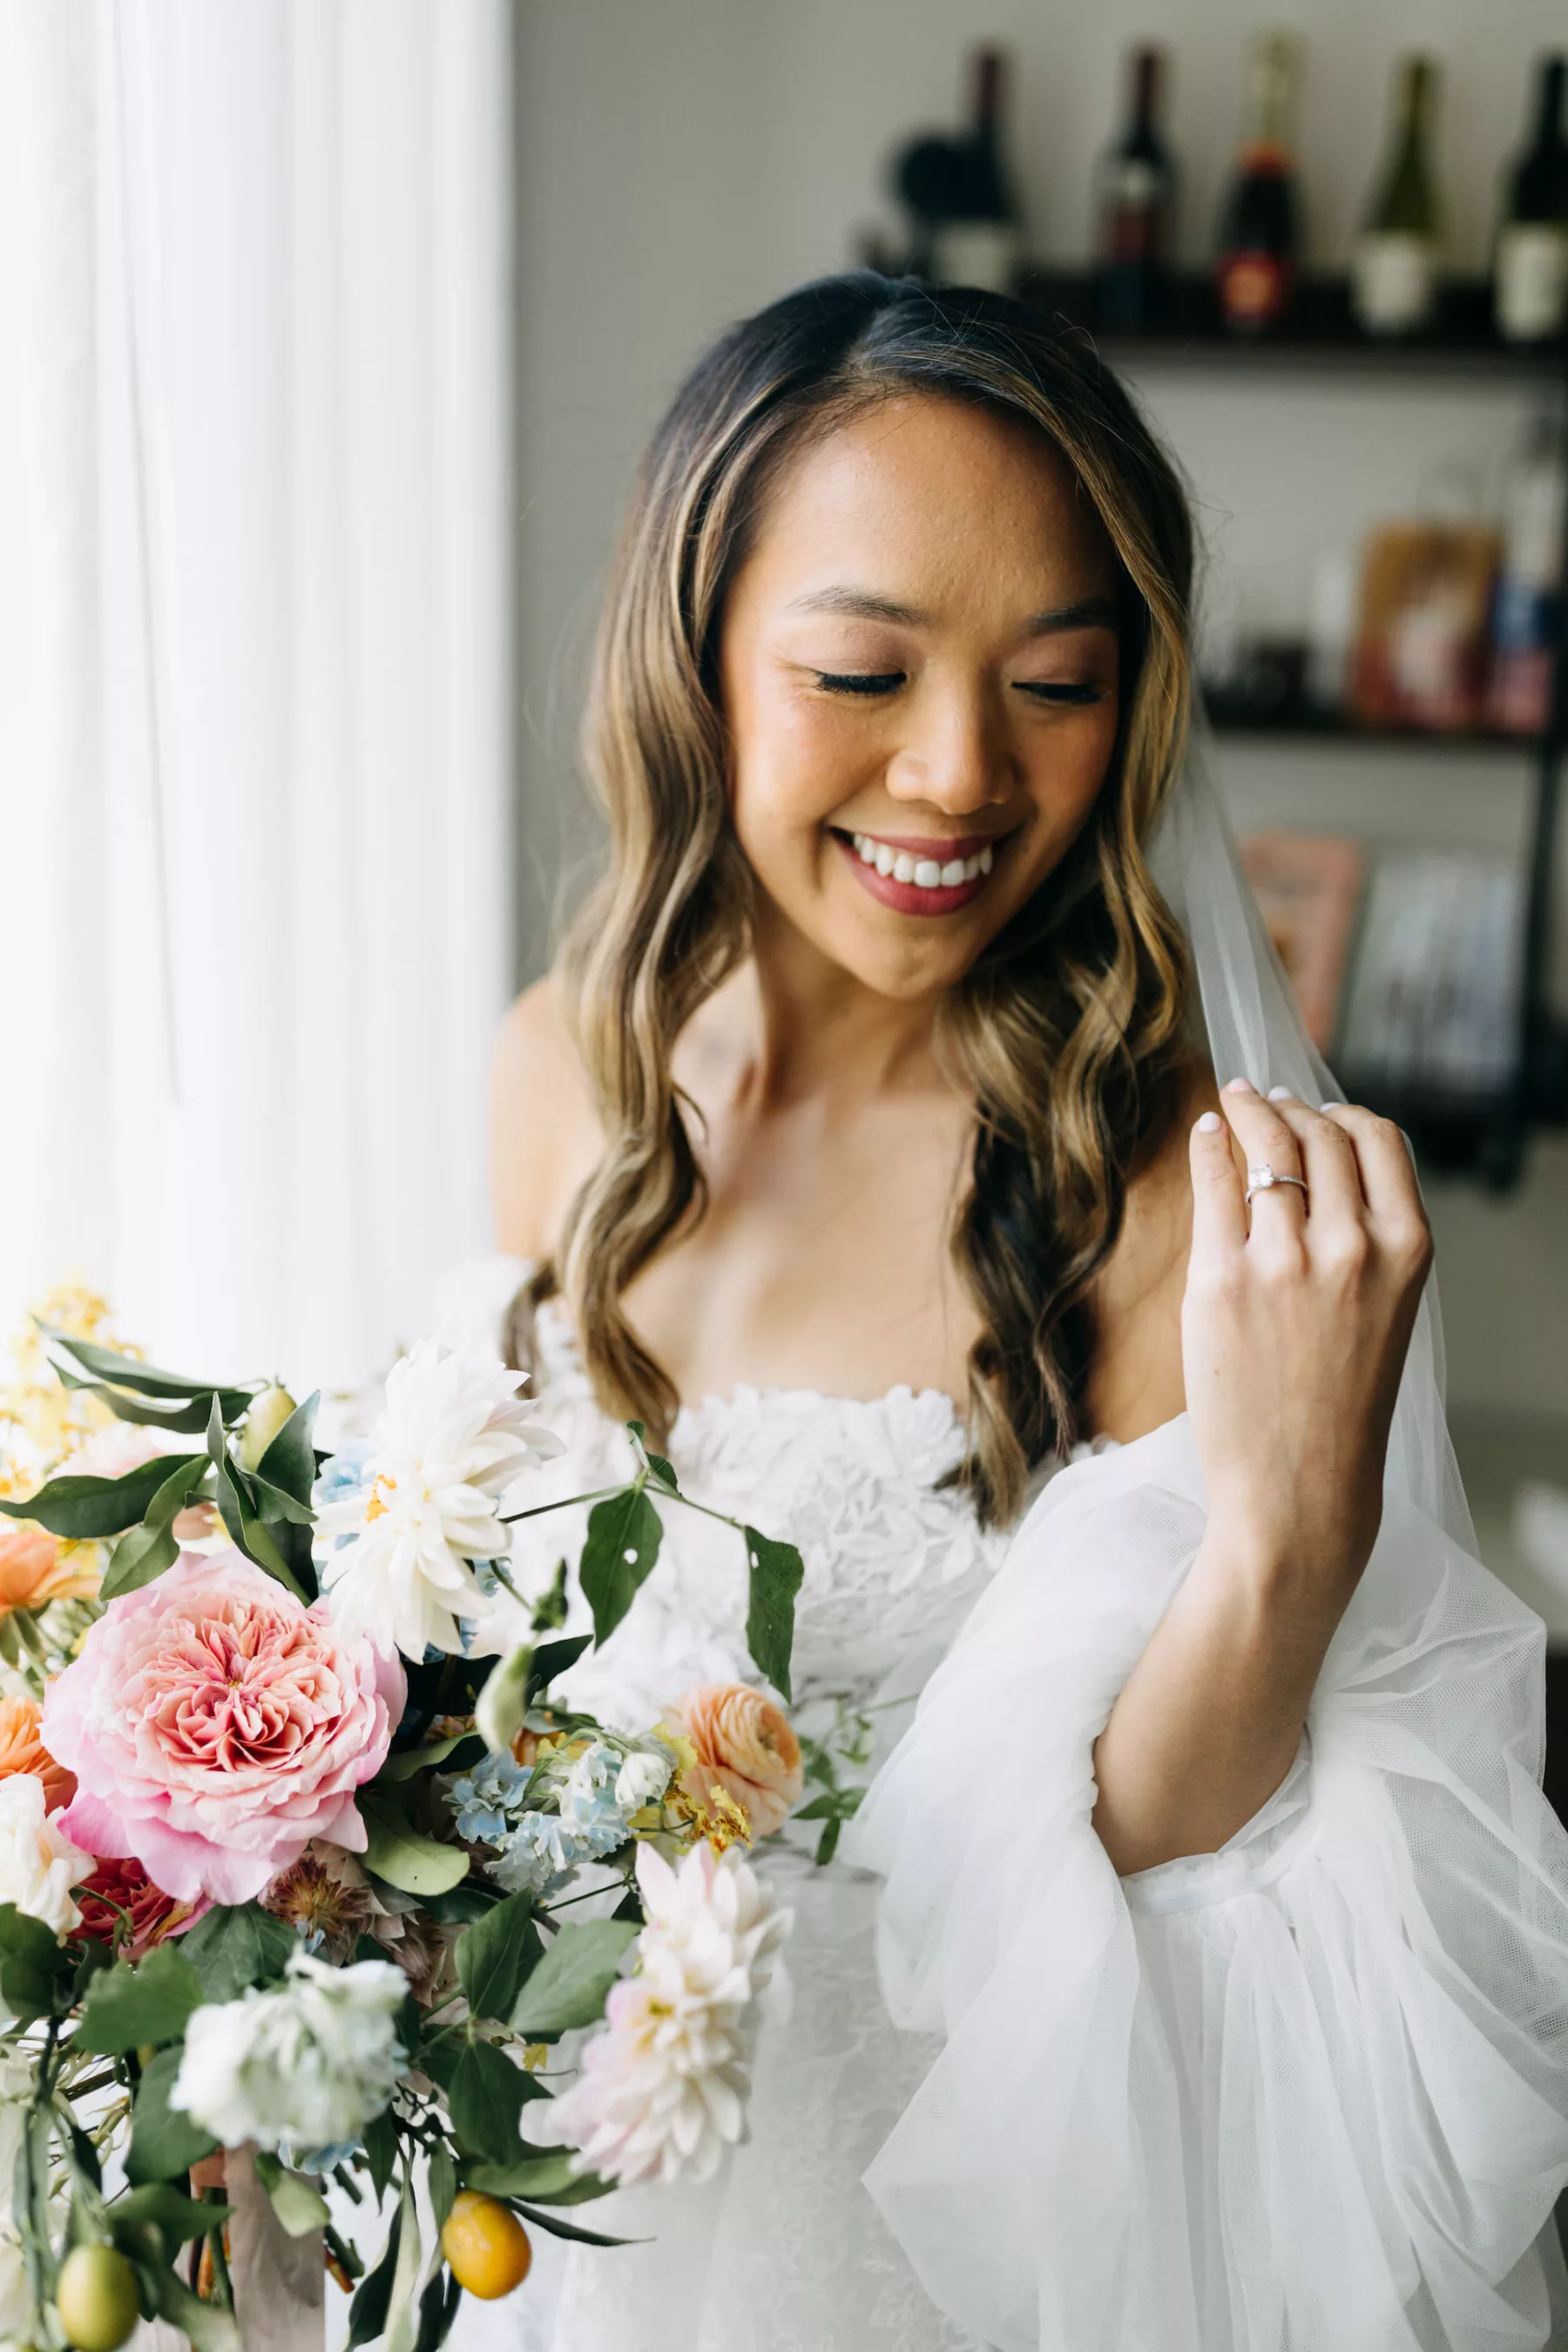 Bride Getting Ready Wedding Portrait | White Lace Off The Shoulder A Line Wedding Dress with Removable Puff Sleeves Ideas | Elegant Bridal Curls, Natural Inspired Makeup | Tampa Bay Hair and Makeup Artist Femme Akoi Beauty Studio | Photographer Amber McWhorter Photography